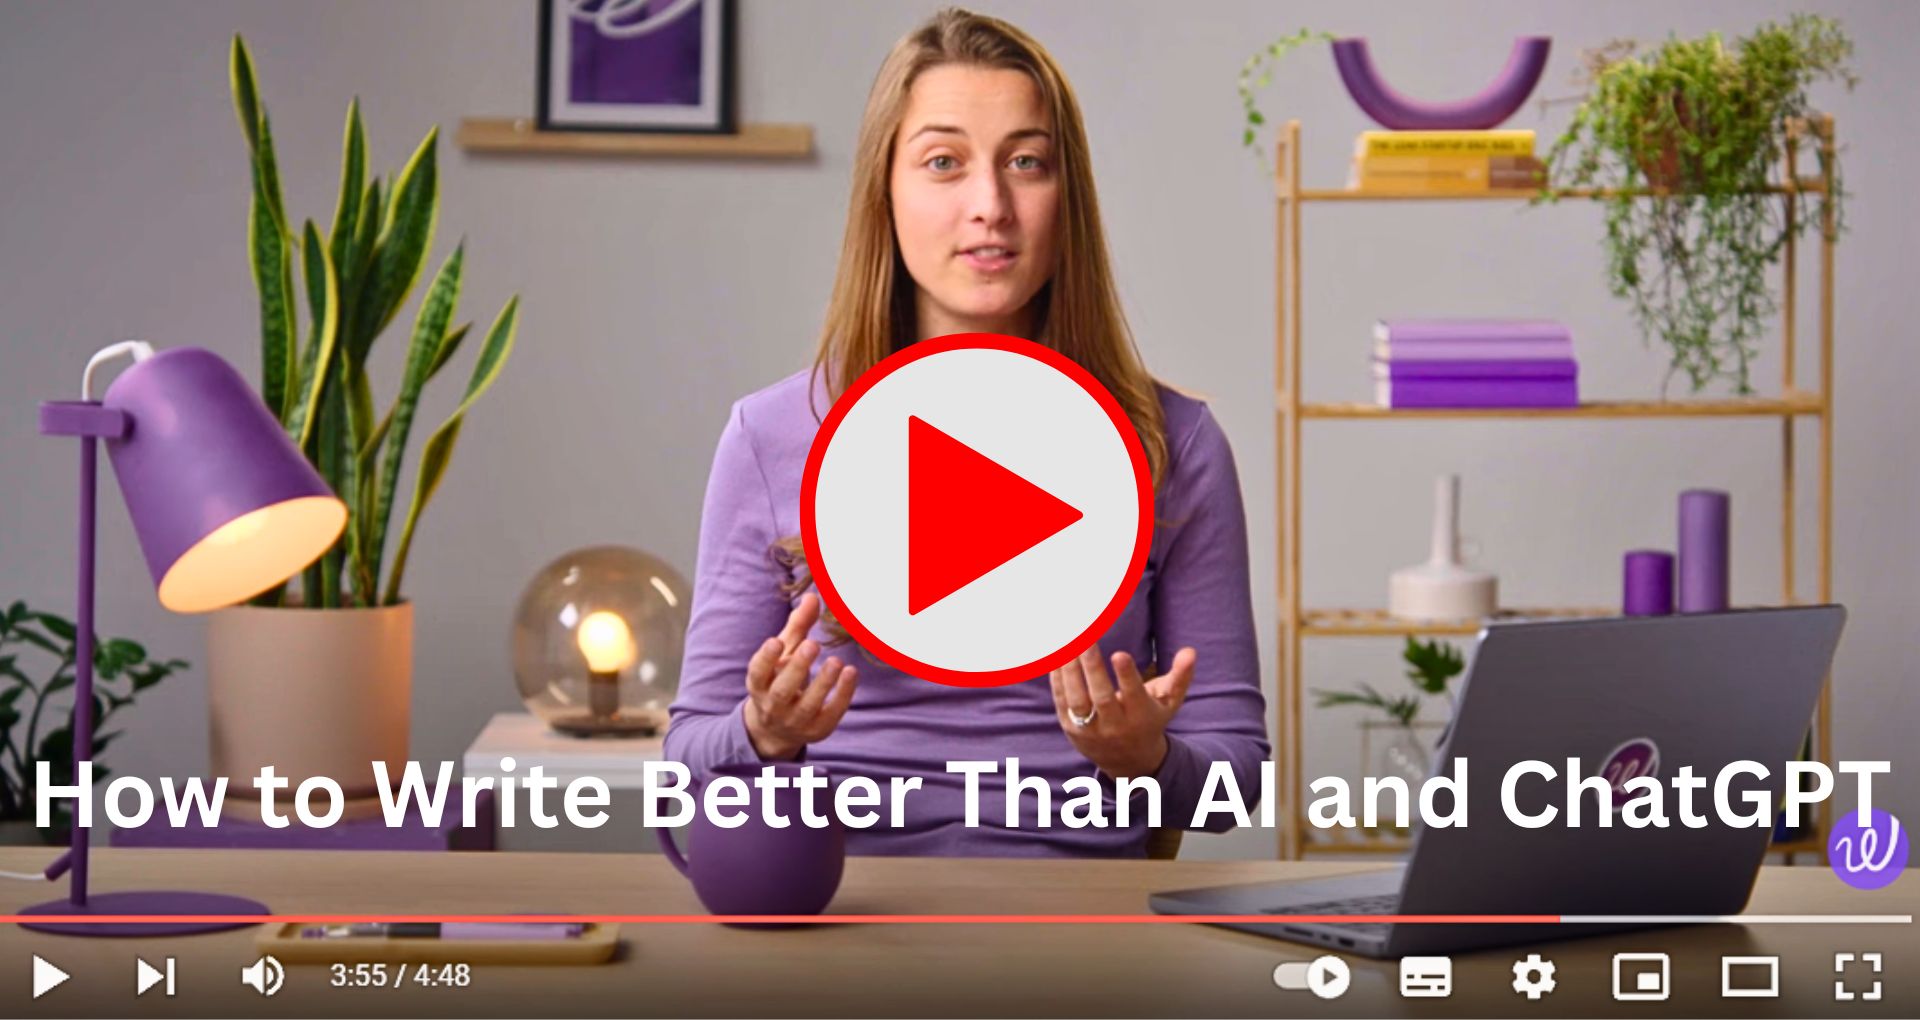 Wordtunes-How to Write Better Than AI and ChatGPT-Video